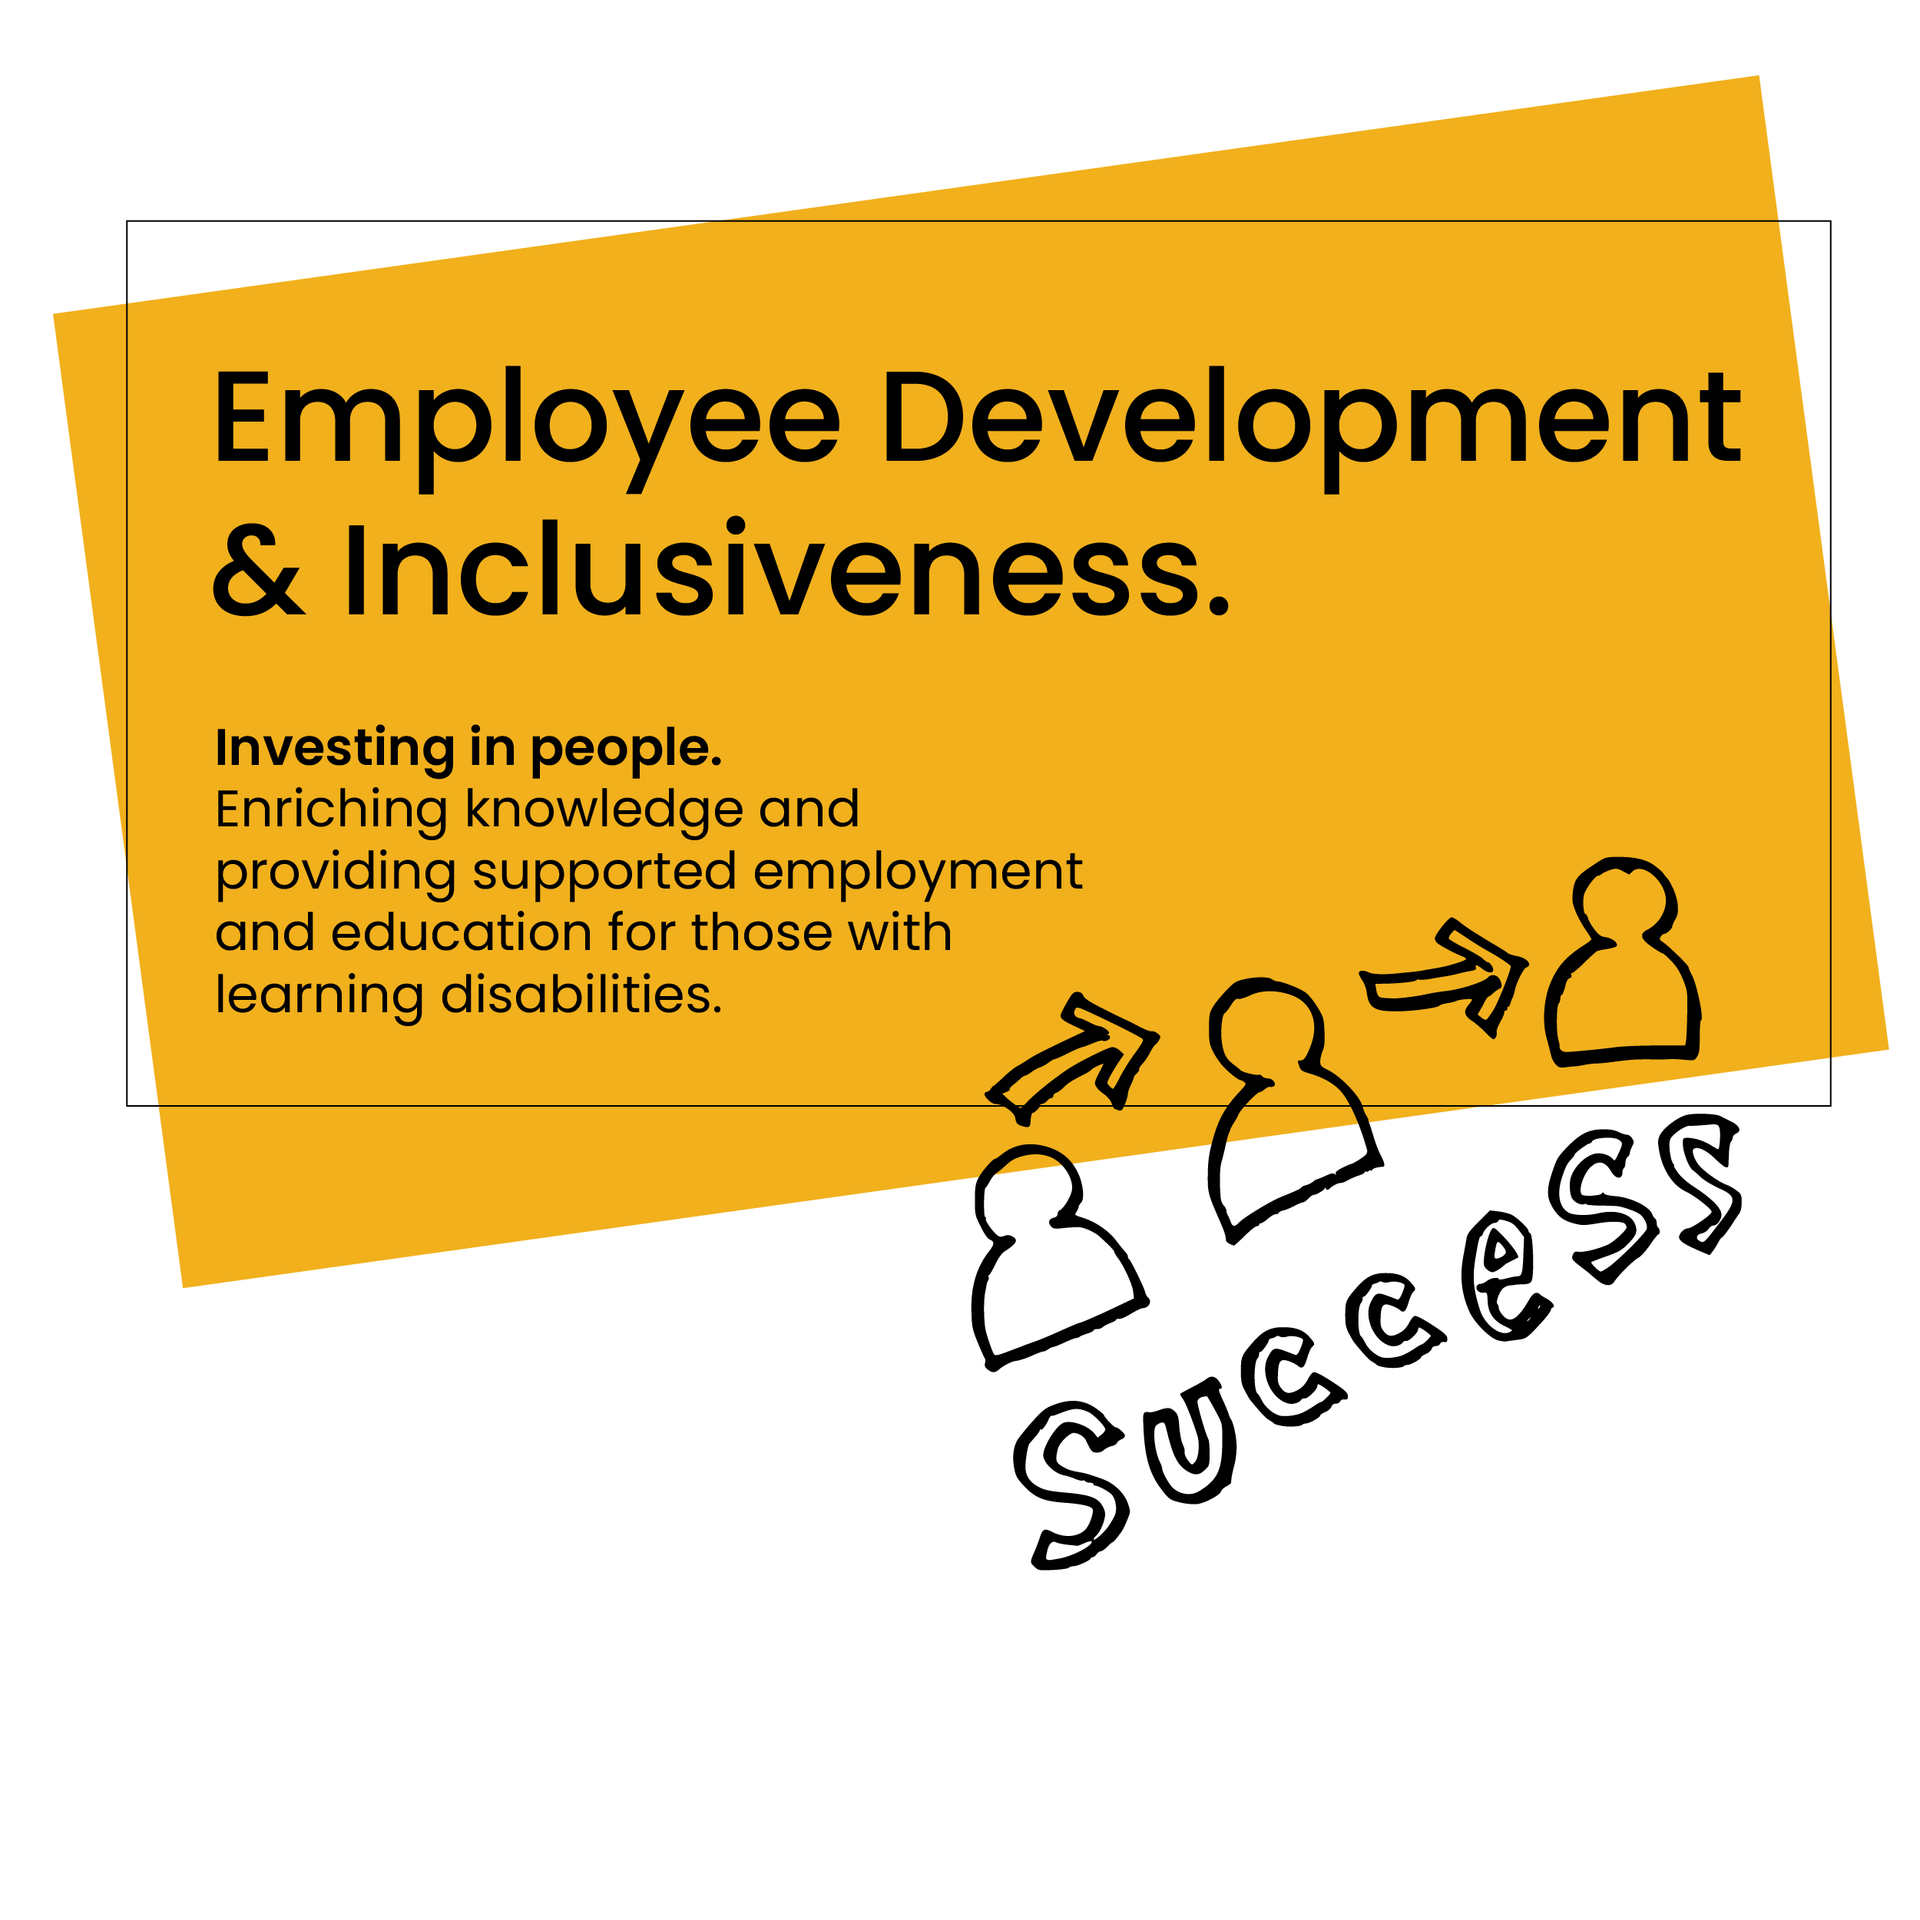 People connected to forward pointing arrows with the word success underneath to represent employee development and inclusiveness